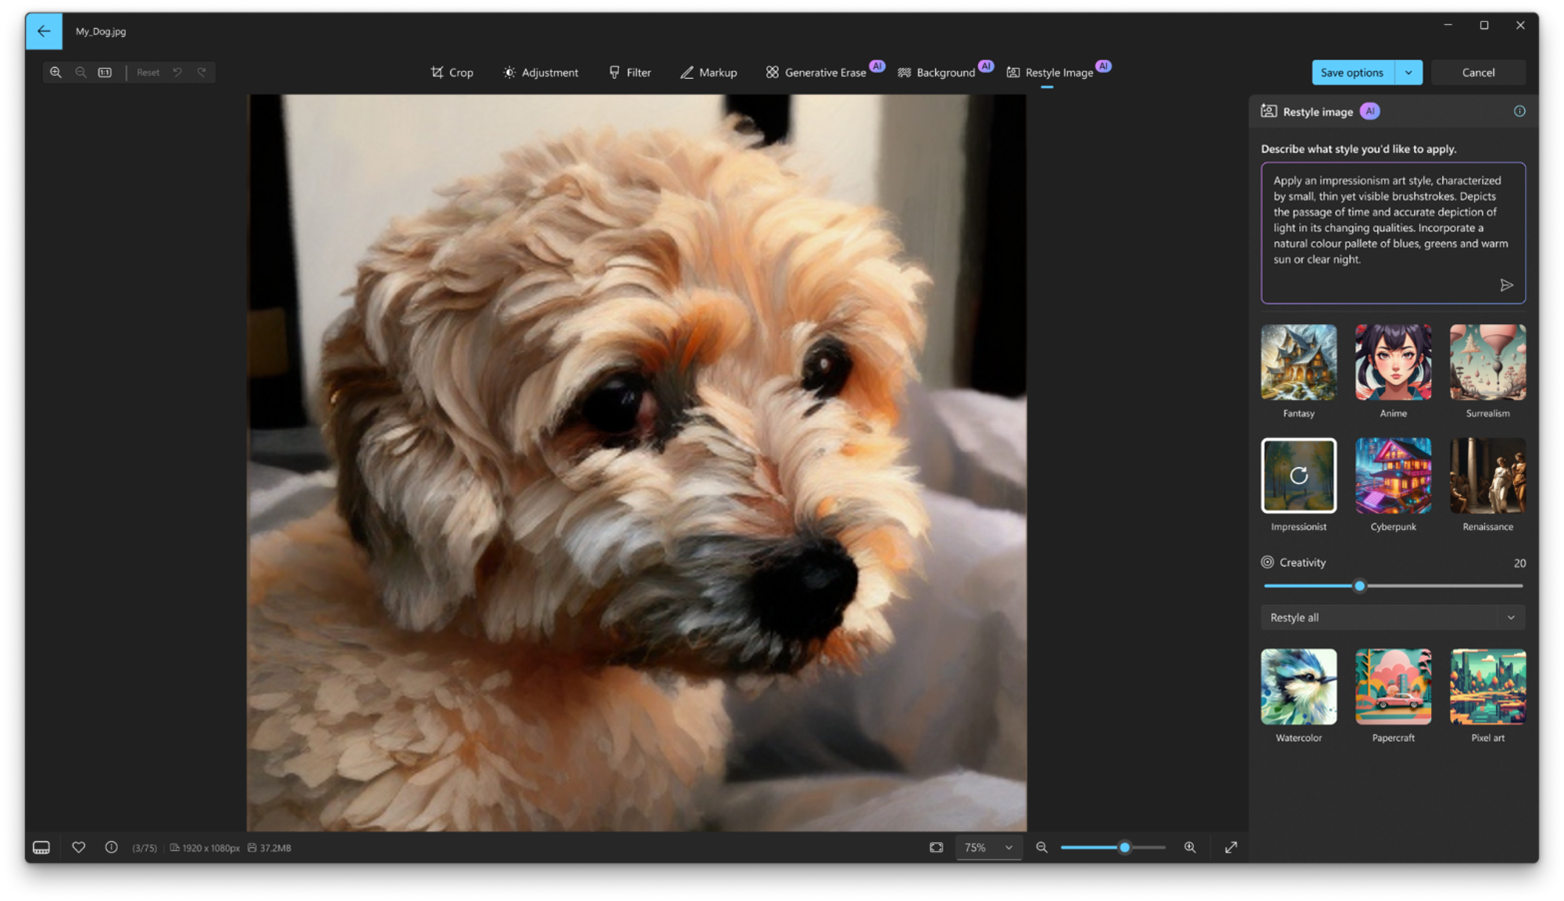 Screenshot of the Windows Photos app with the Restyle Image option opened in the app